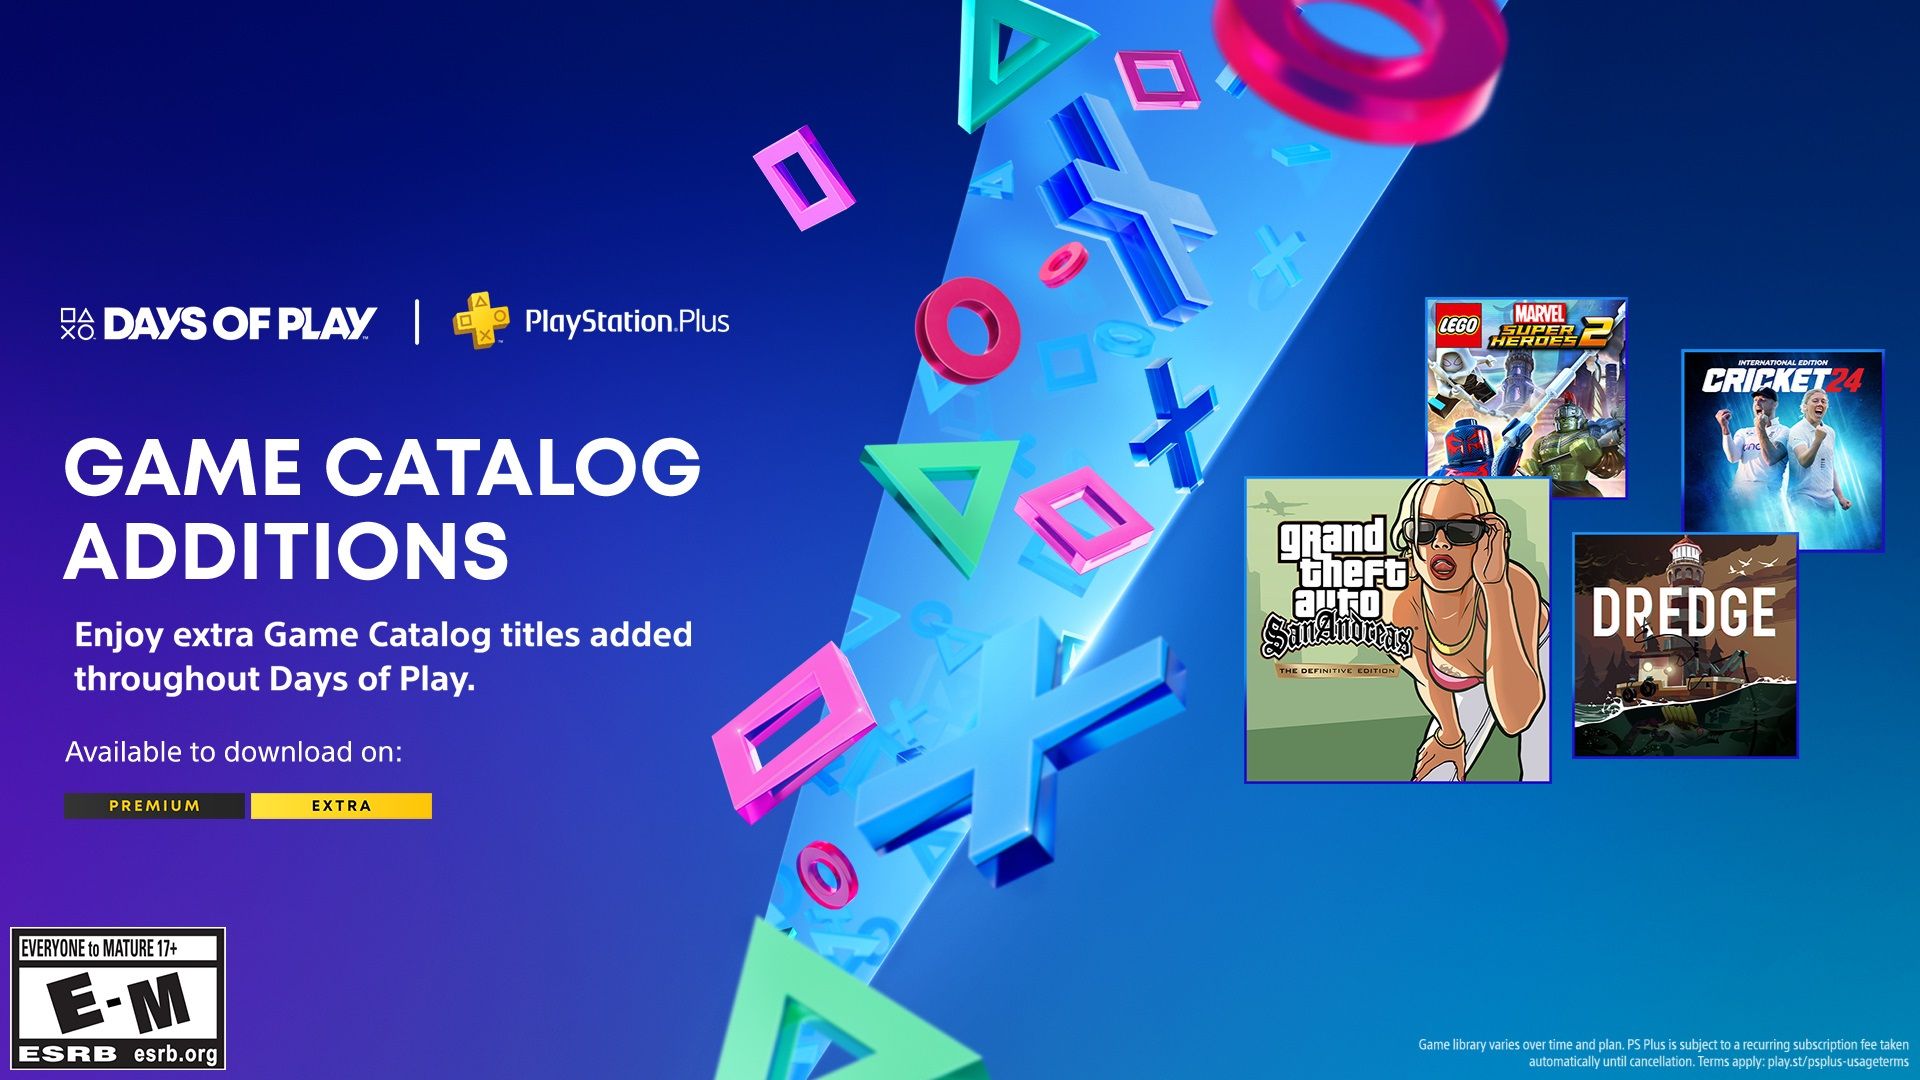 ps plus extra days of play games